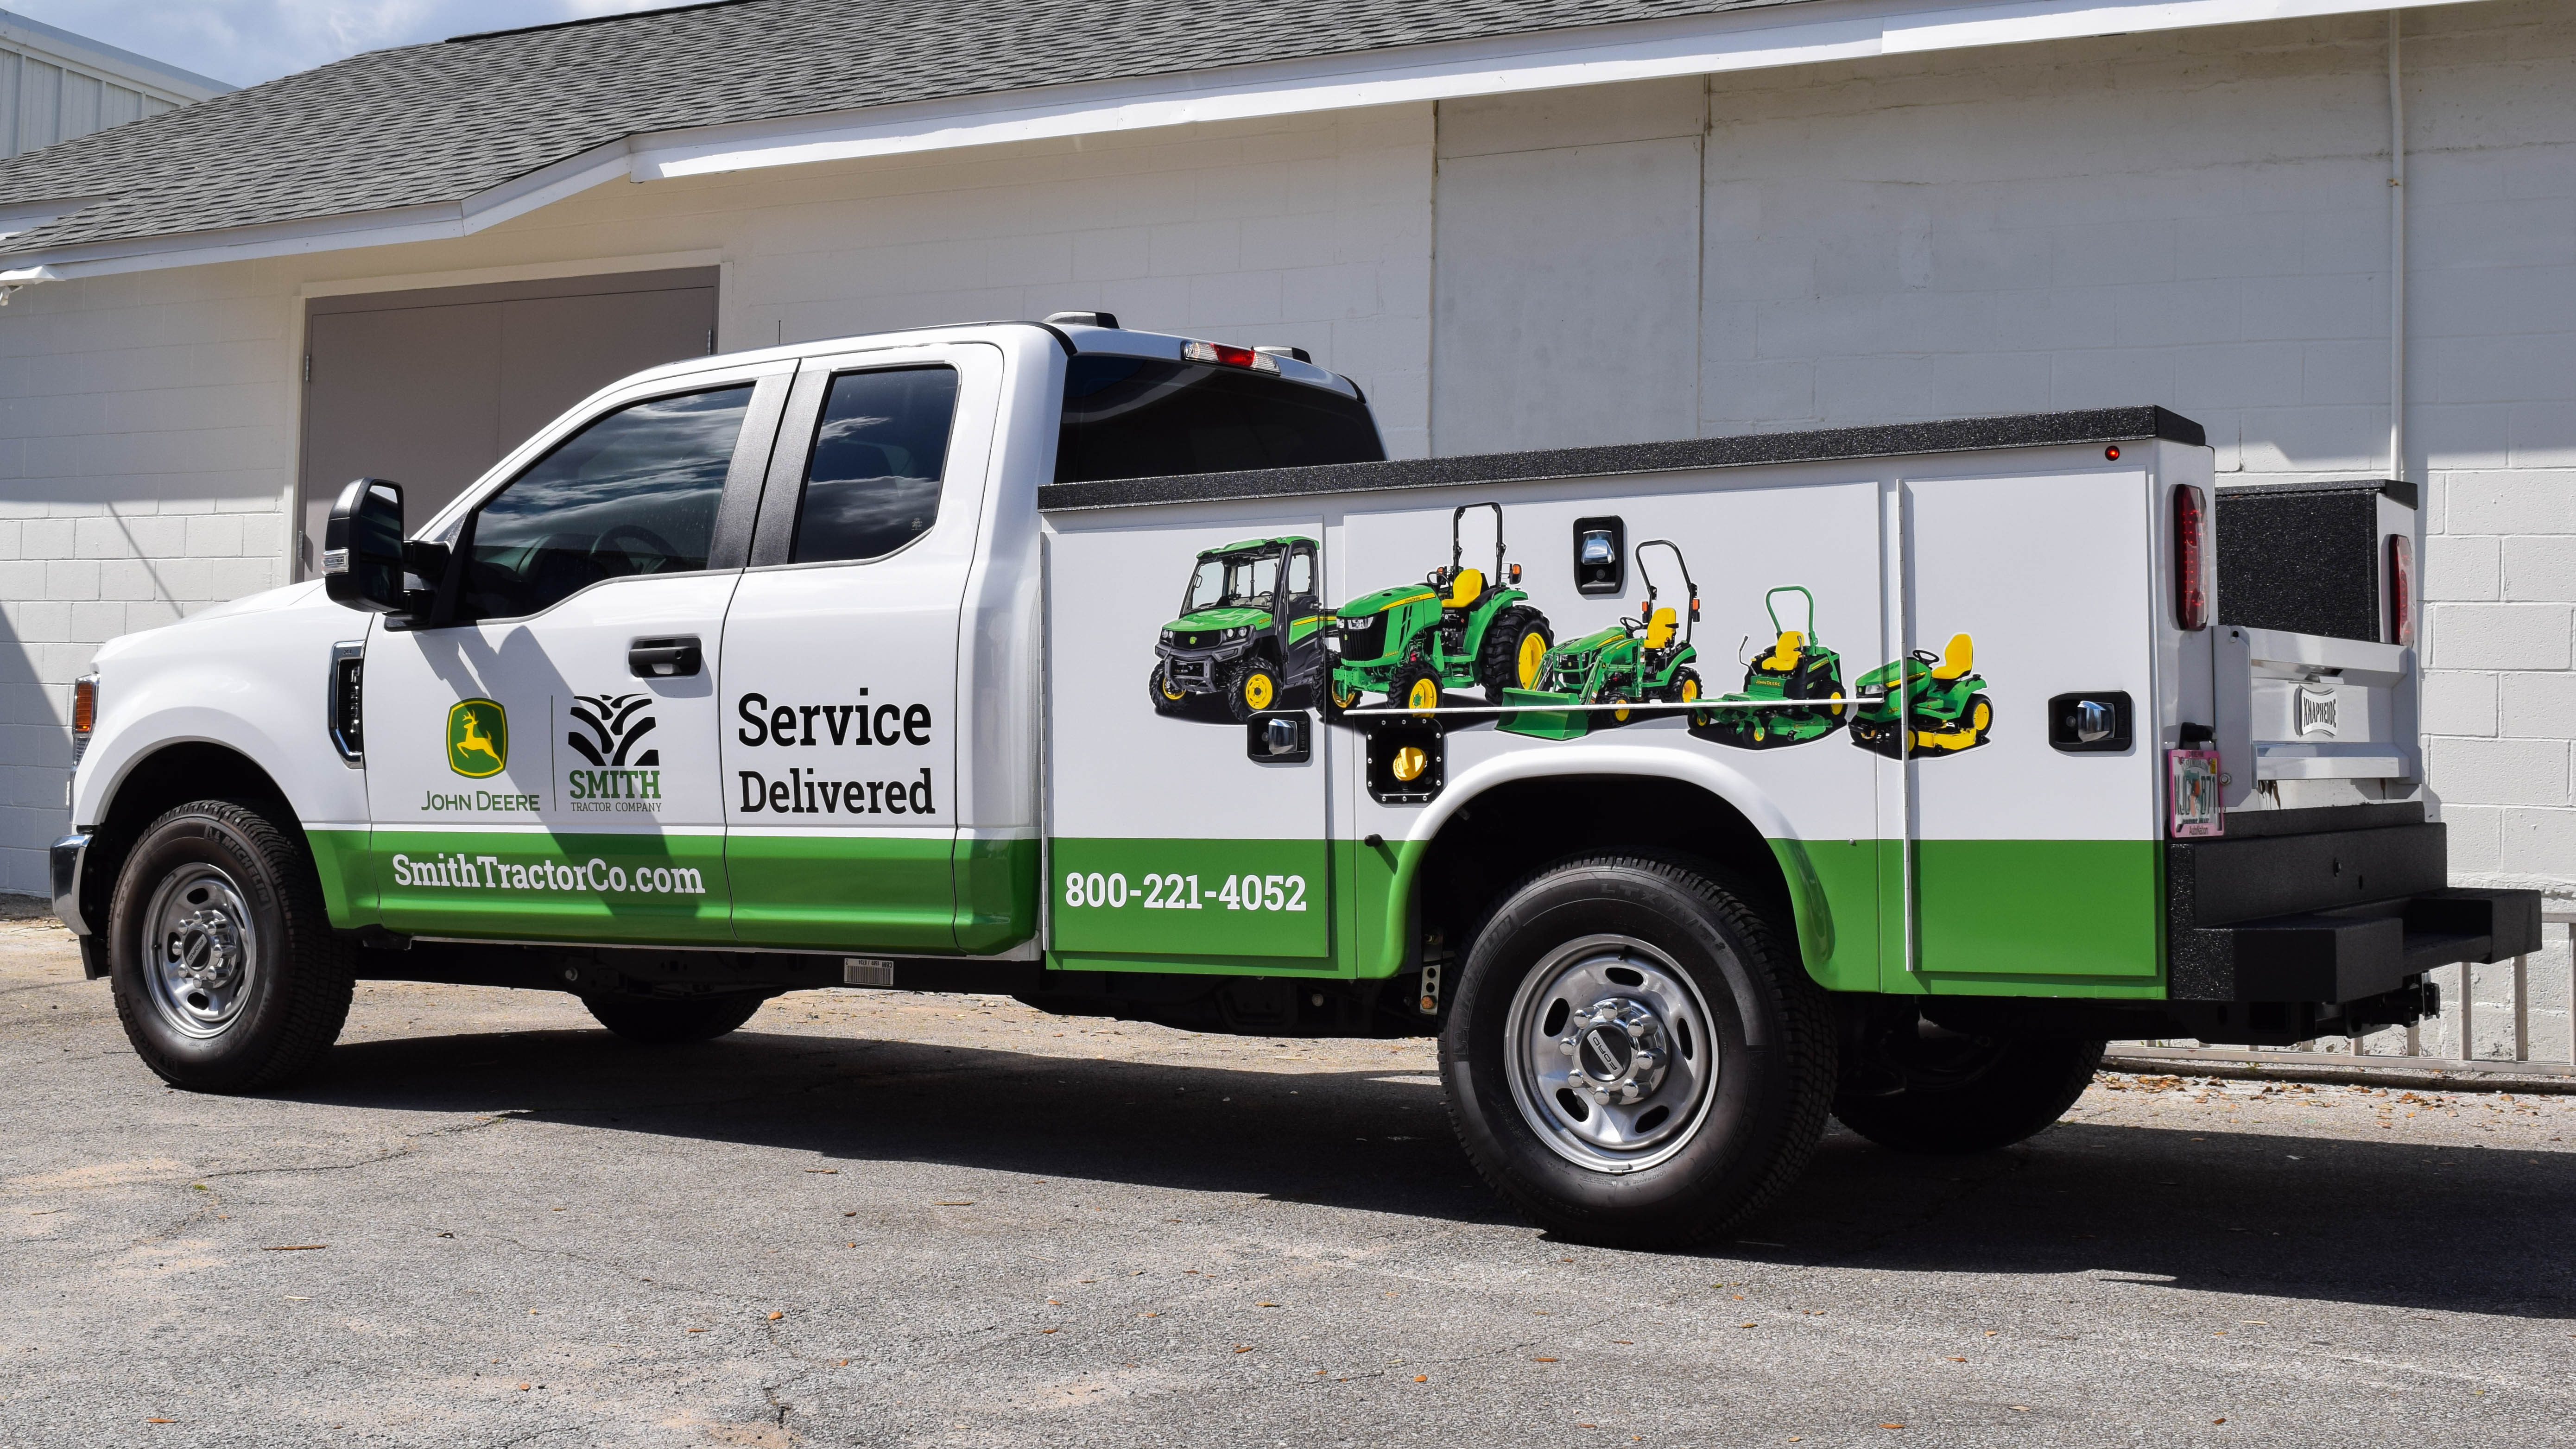 Vehicle graphics for Smith Tractor Company Utility Truck 